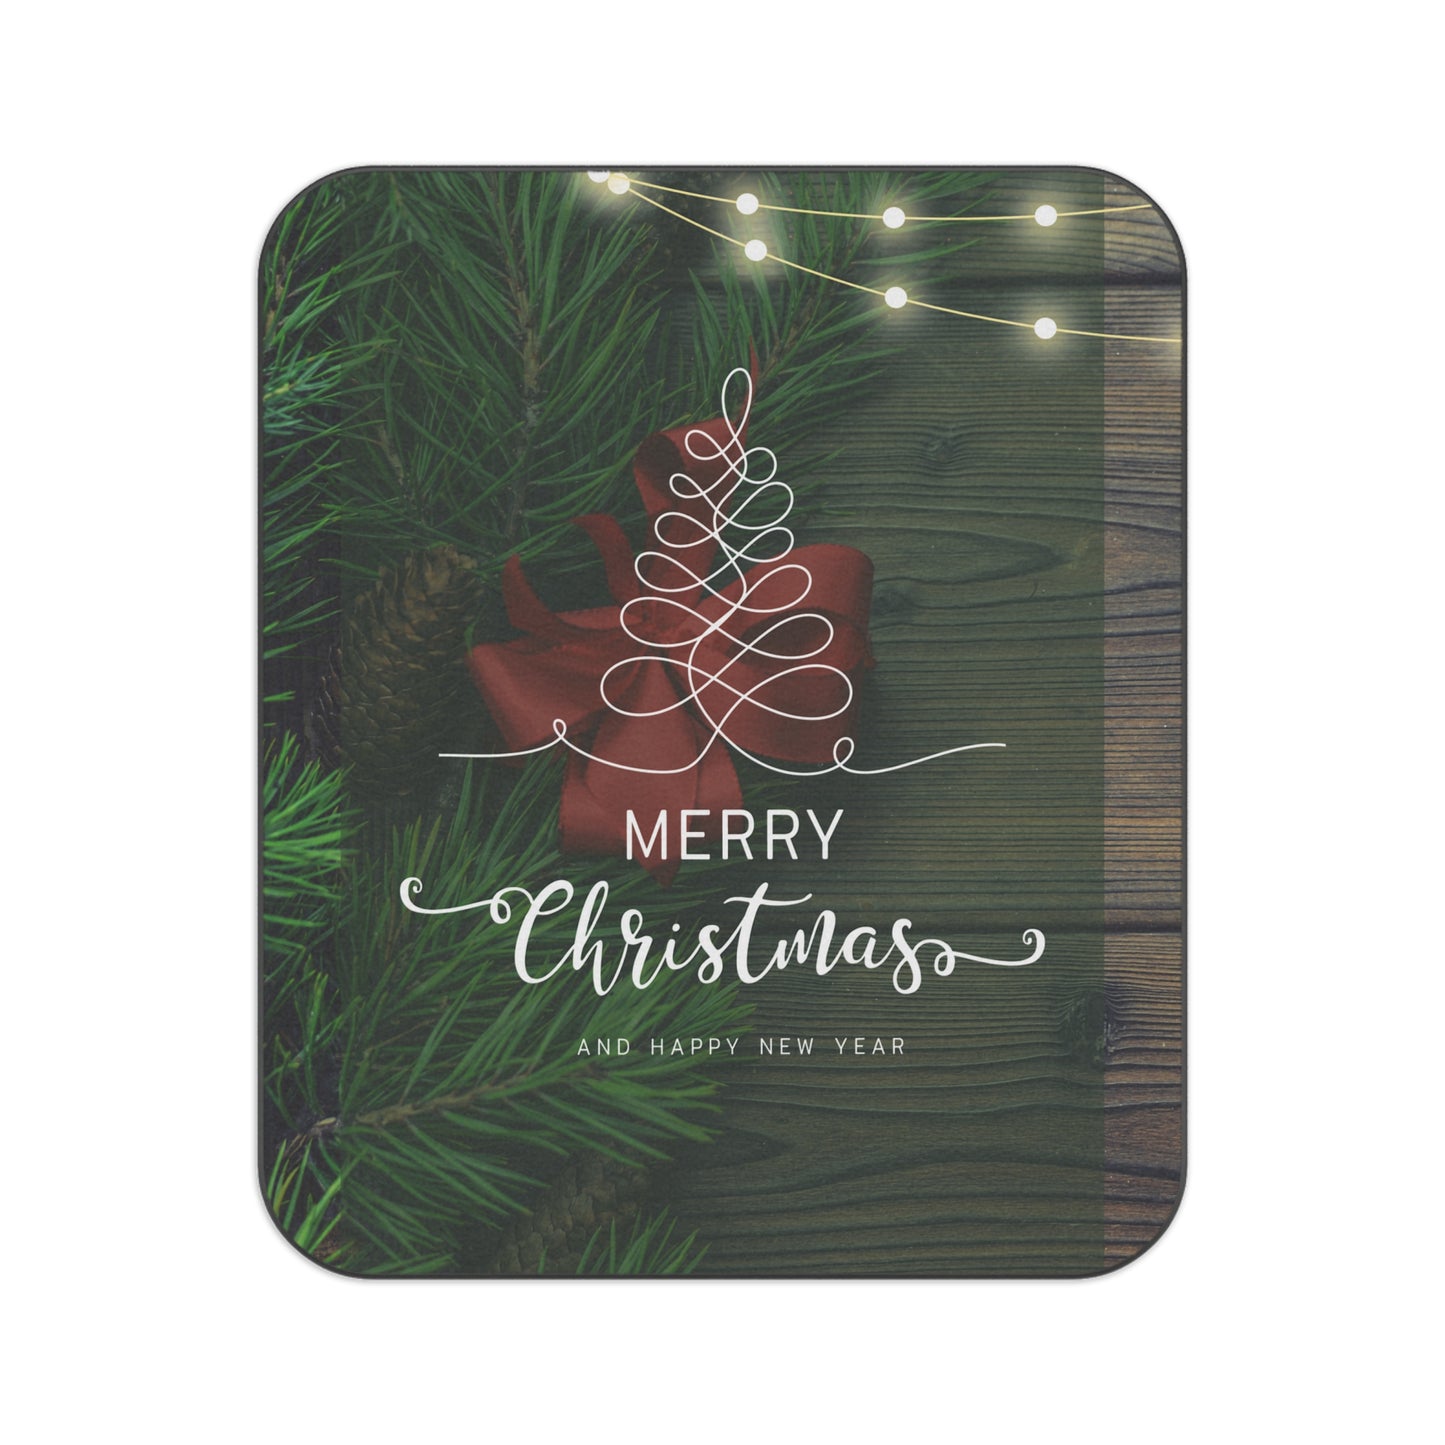 Merry Christmas with Tree Printed Picnic Blanket